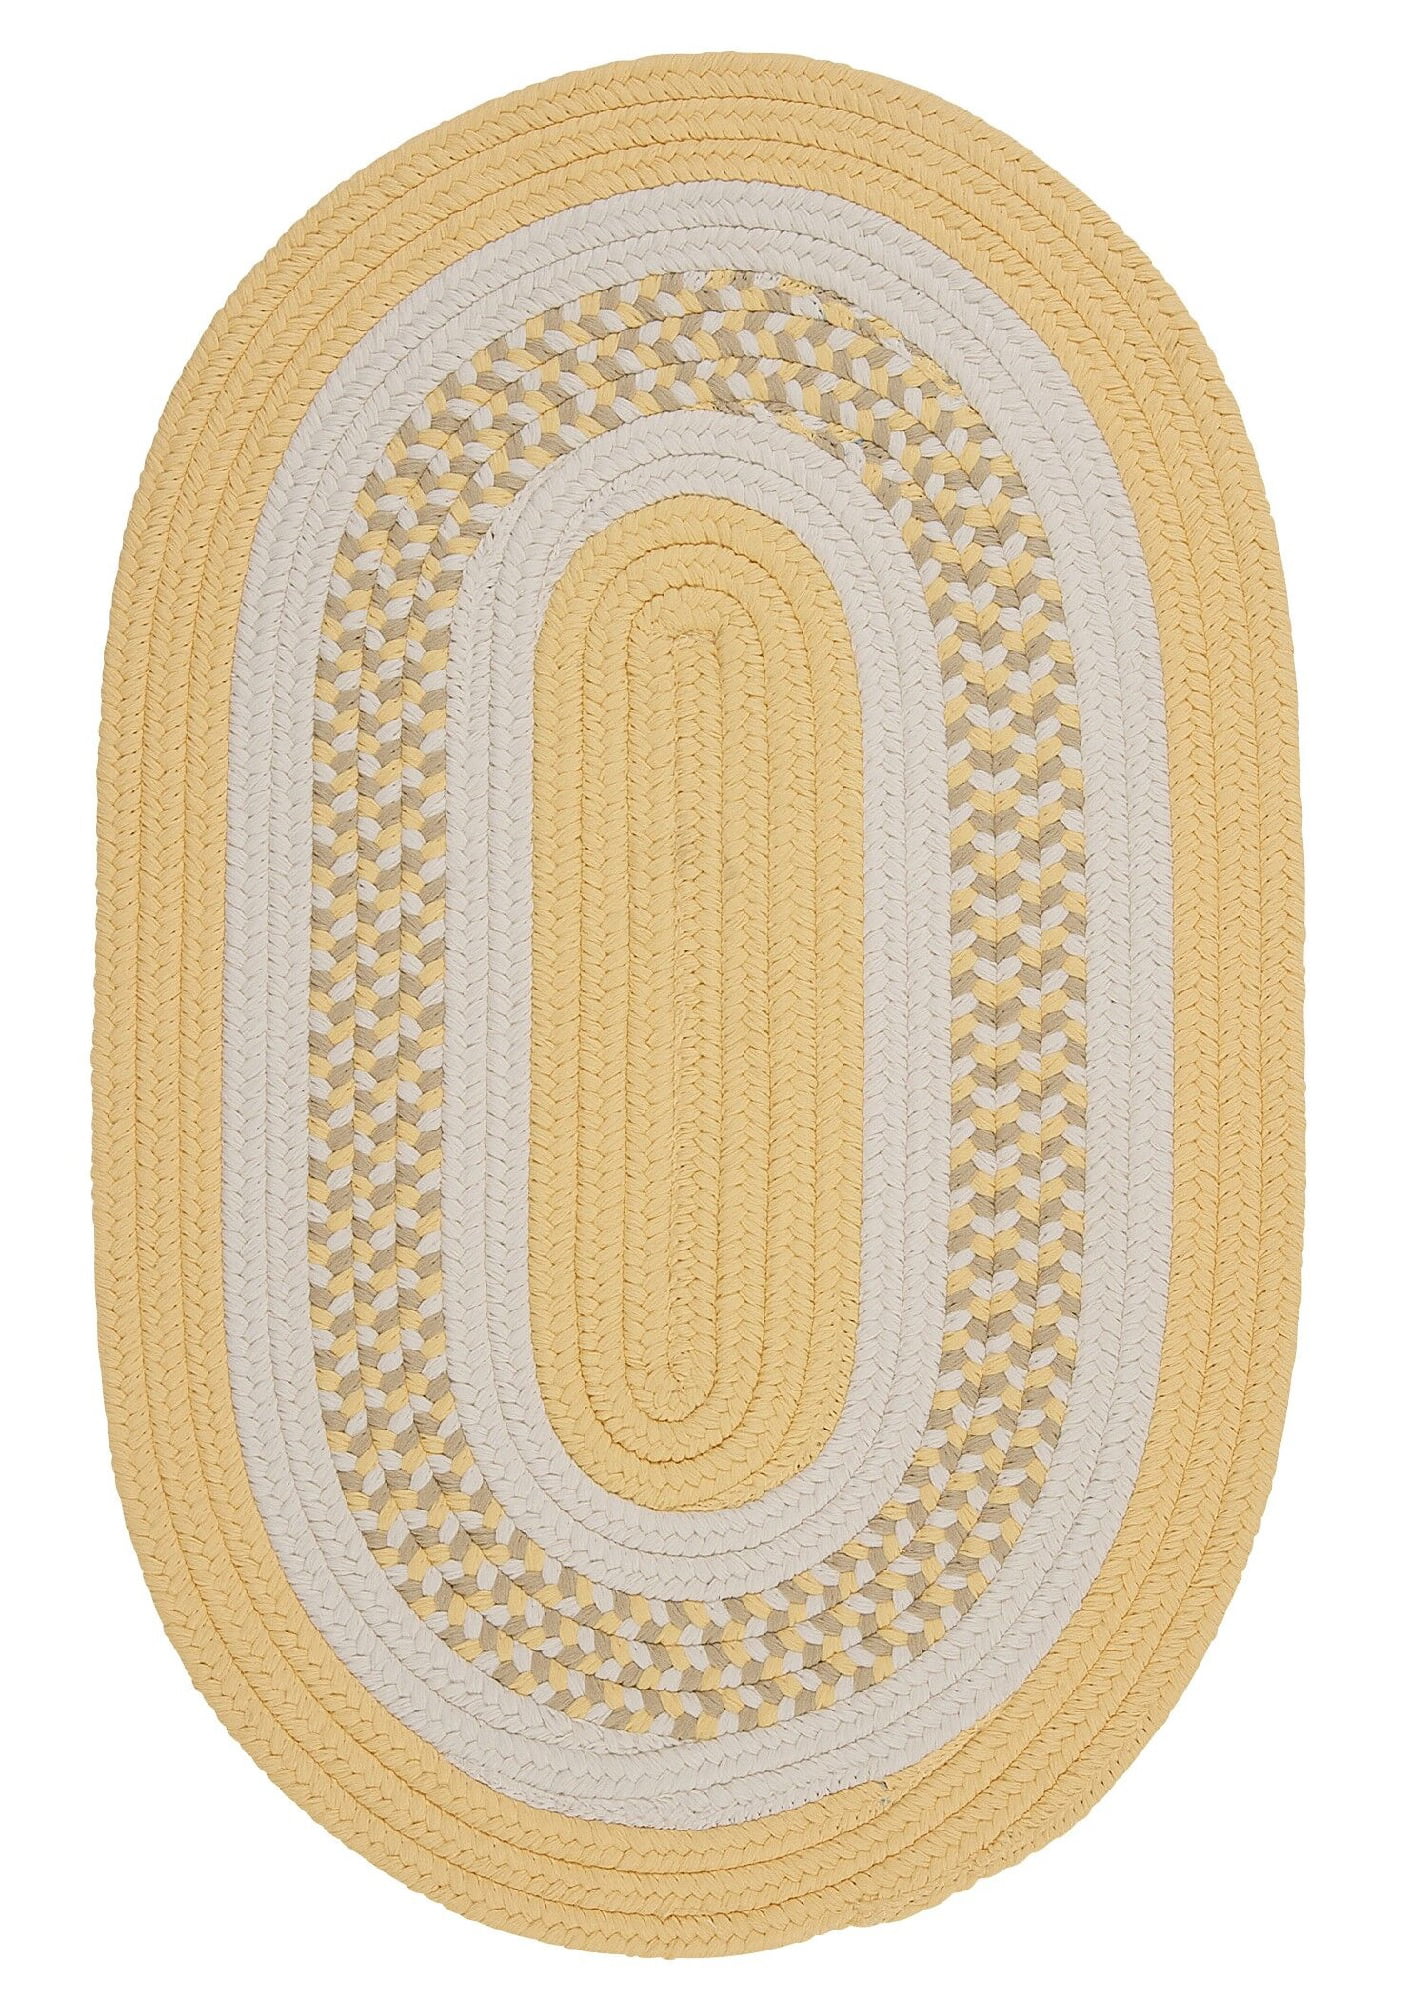 2 X 4 Yellow And White Oval Handmade, Yellow And White Rugs